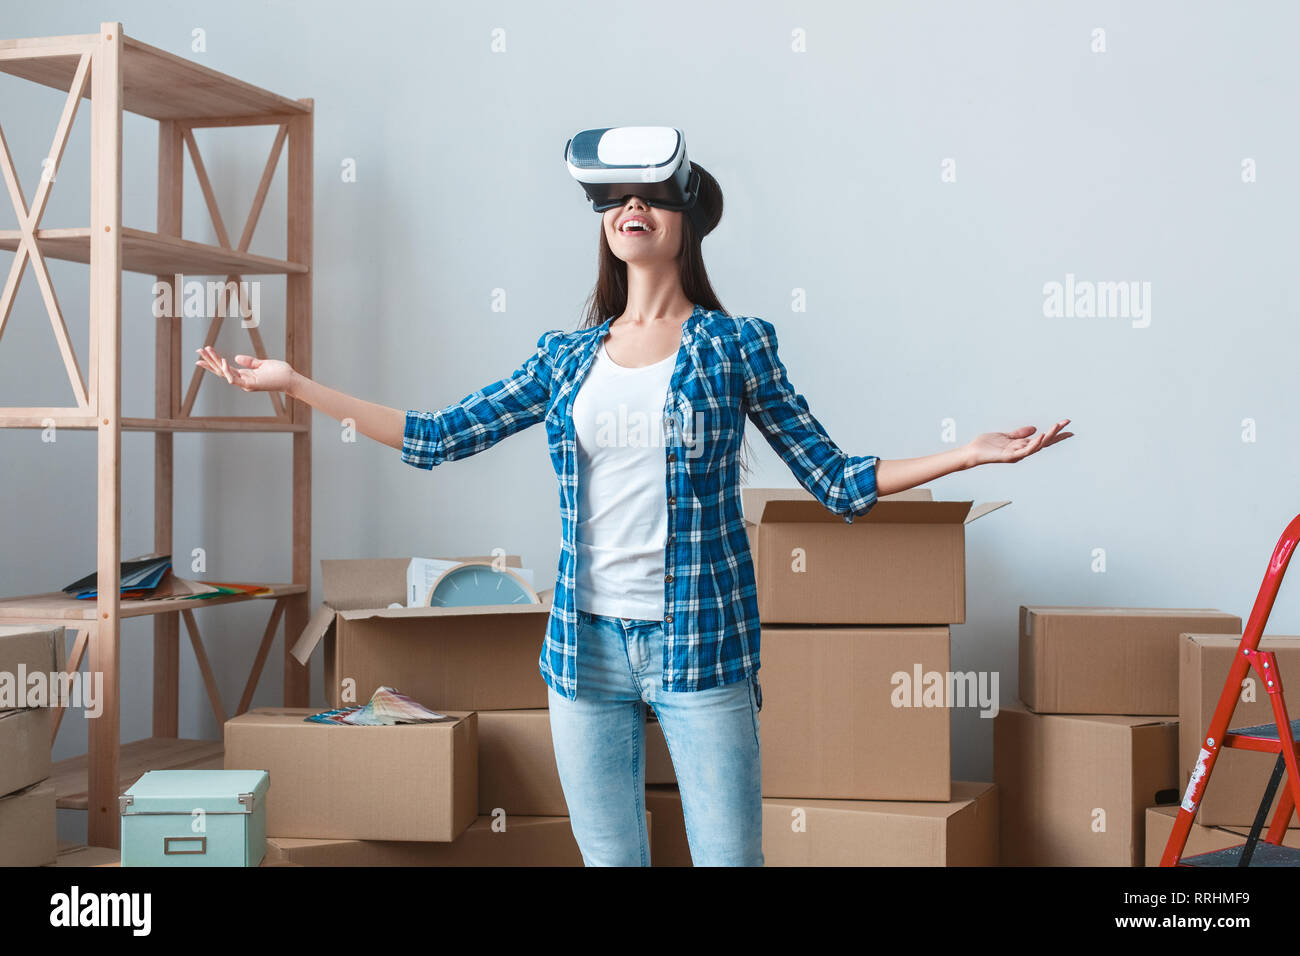 Young woman moving to a new place standing looking in virtual reality headset smiling excited Stock Photo